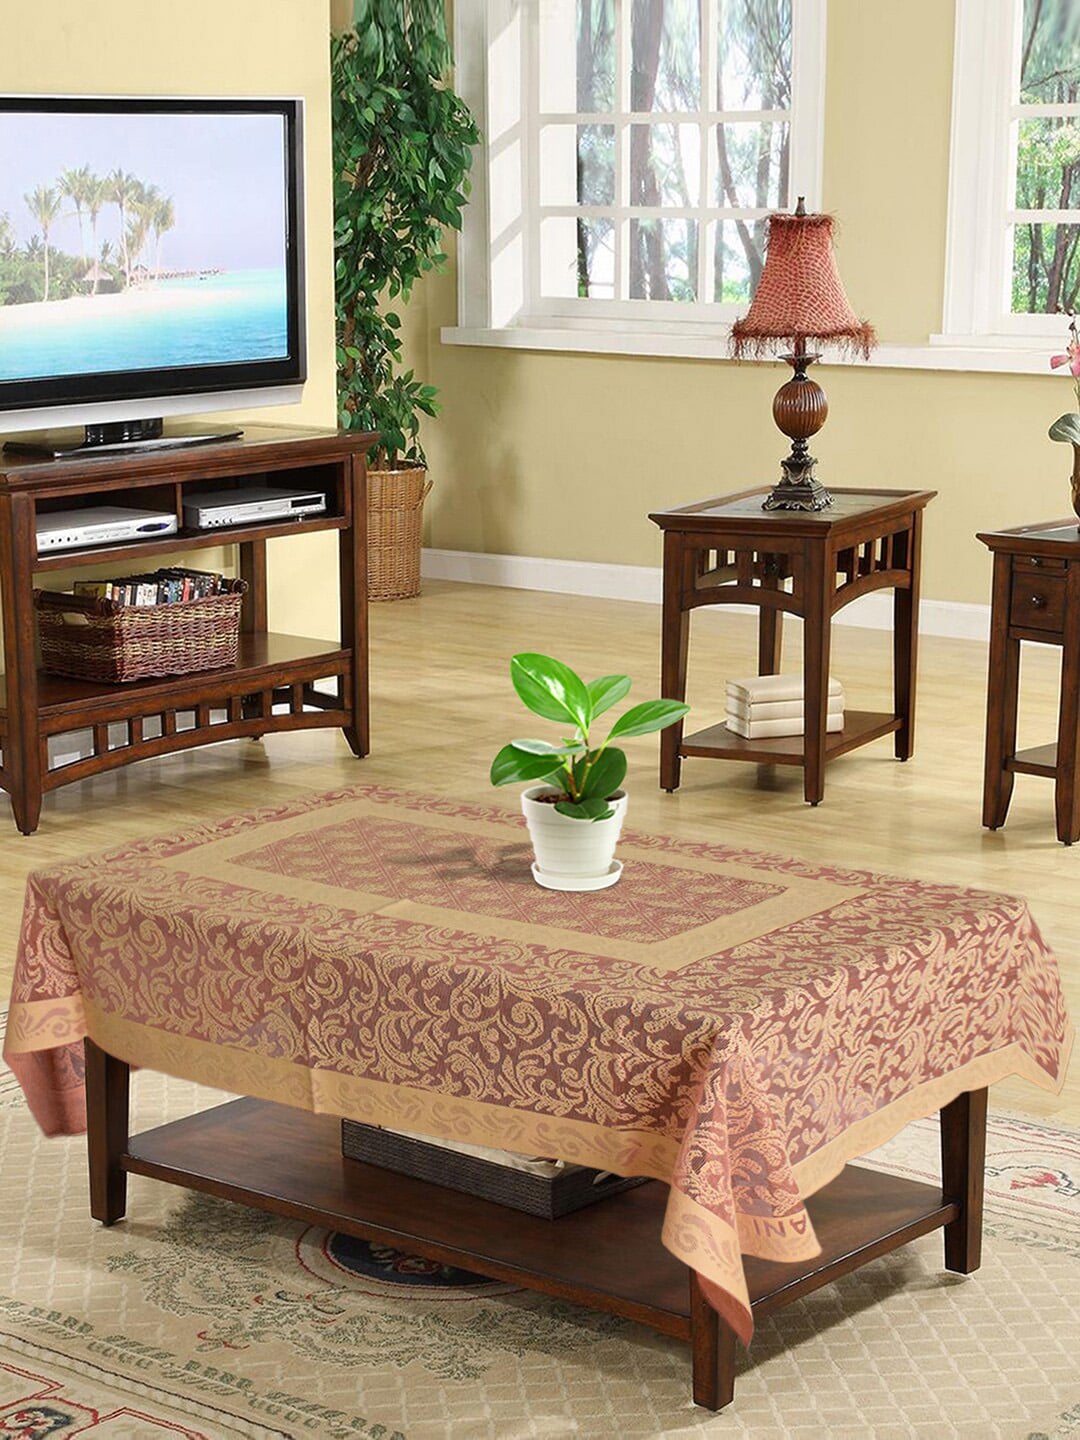 Kuber Industries Beige & Brown Printed 4 Seater Cotton Table Cover Price in India